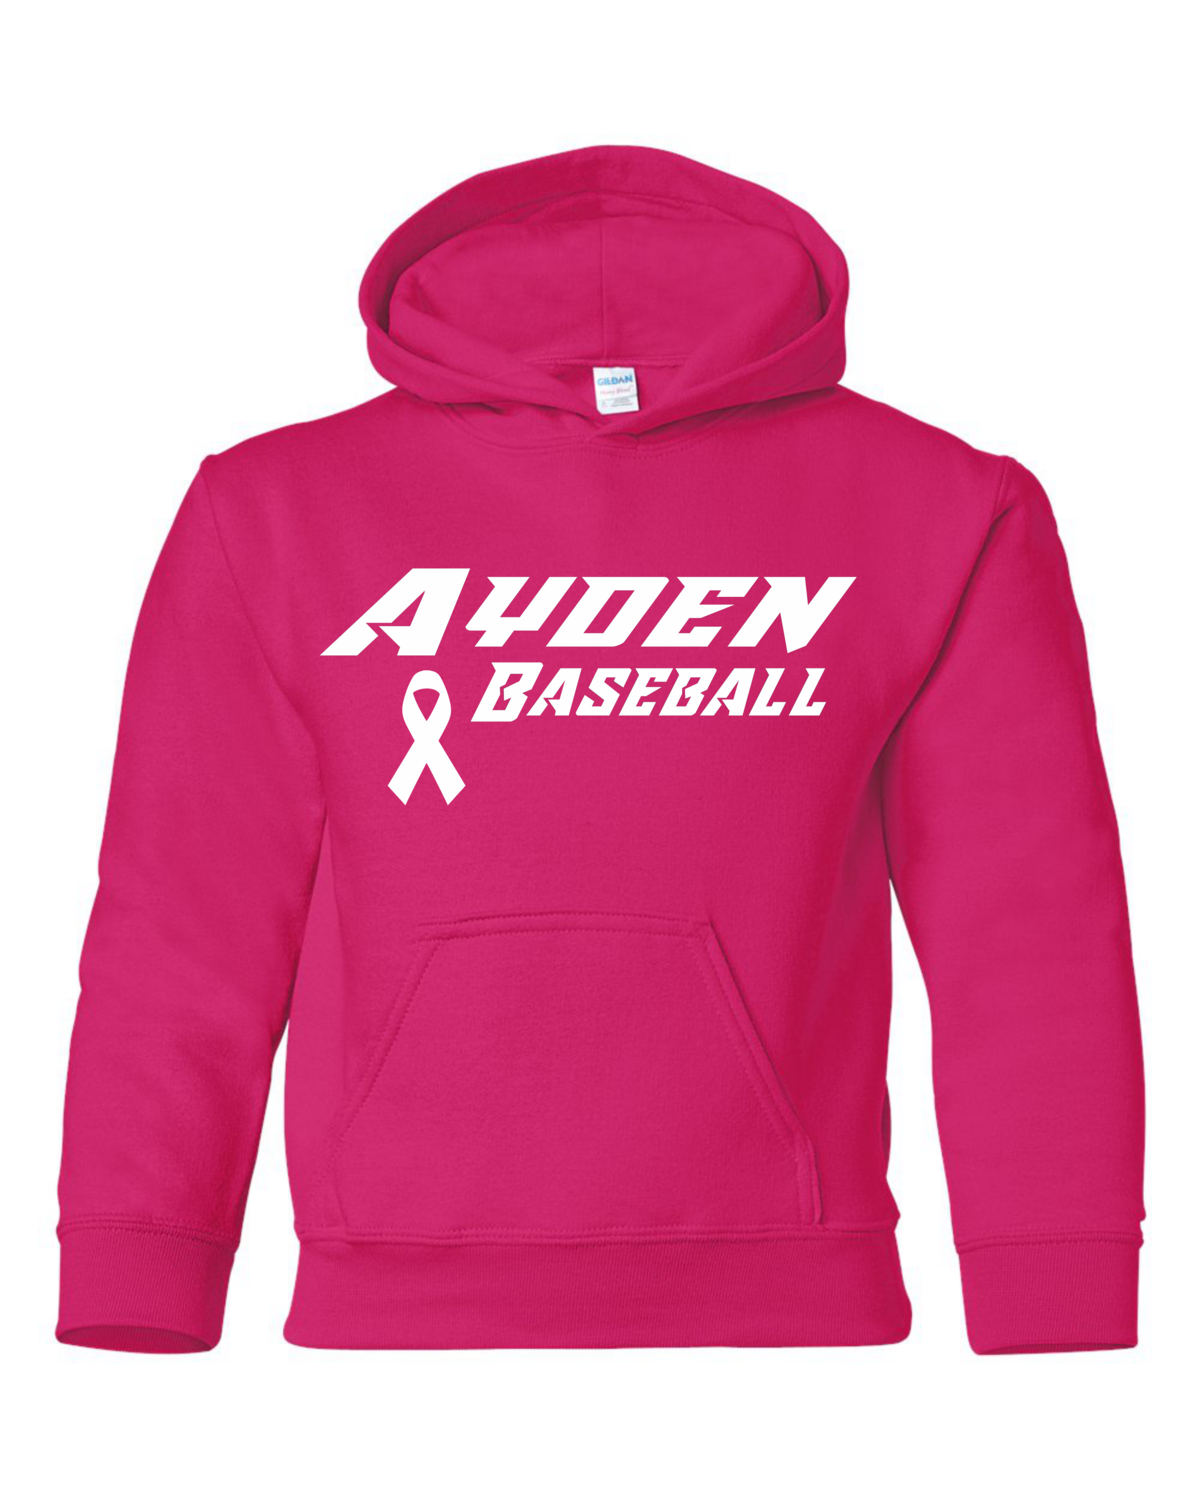 Breast Cancer Awareness Hoodie (Pink) - Adult & Youth